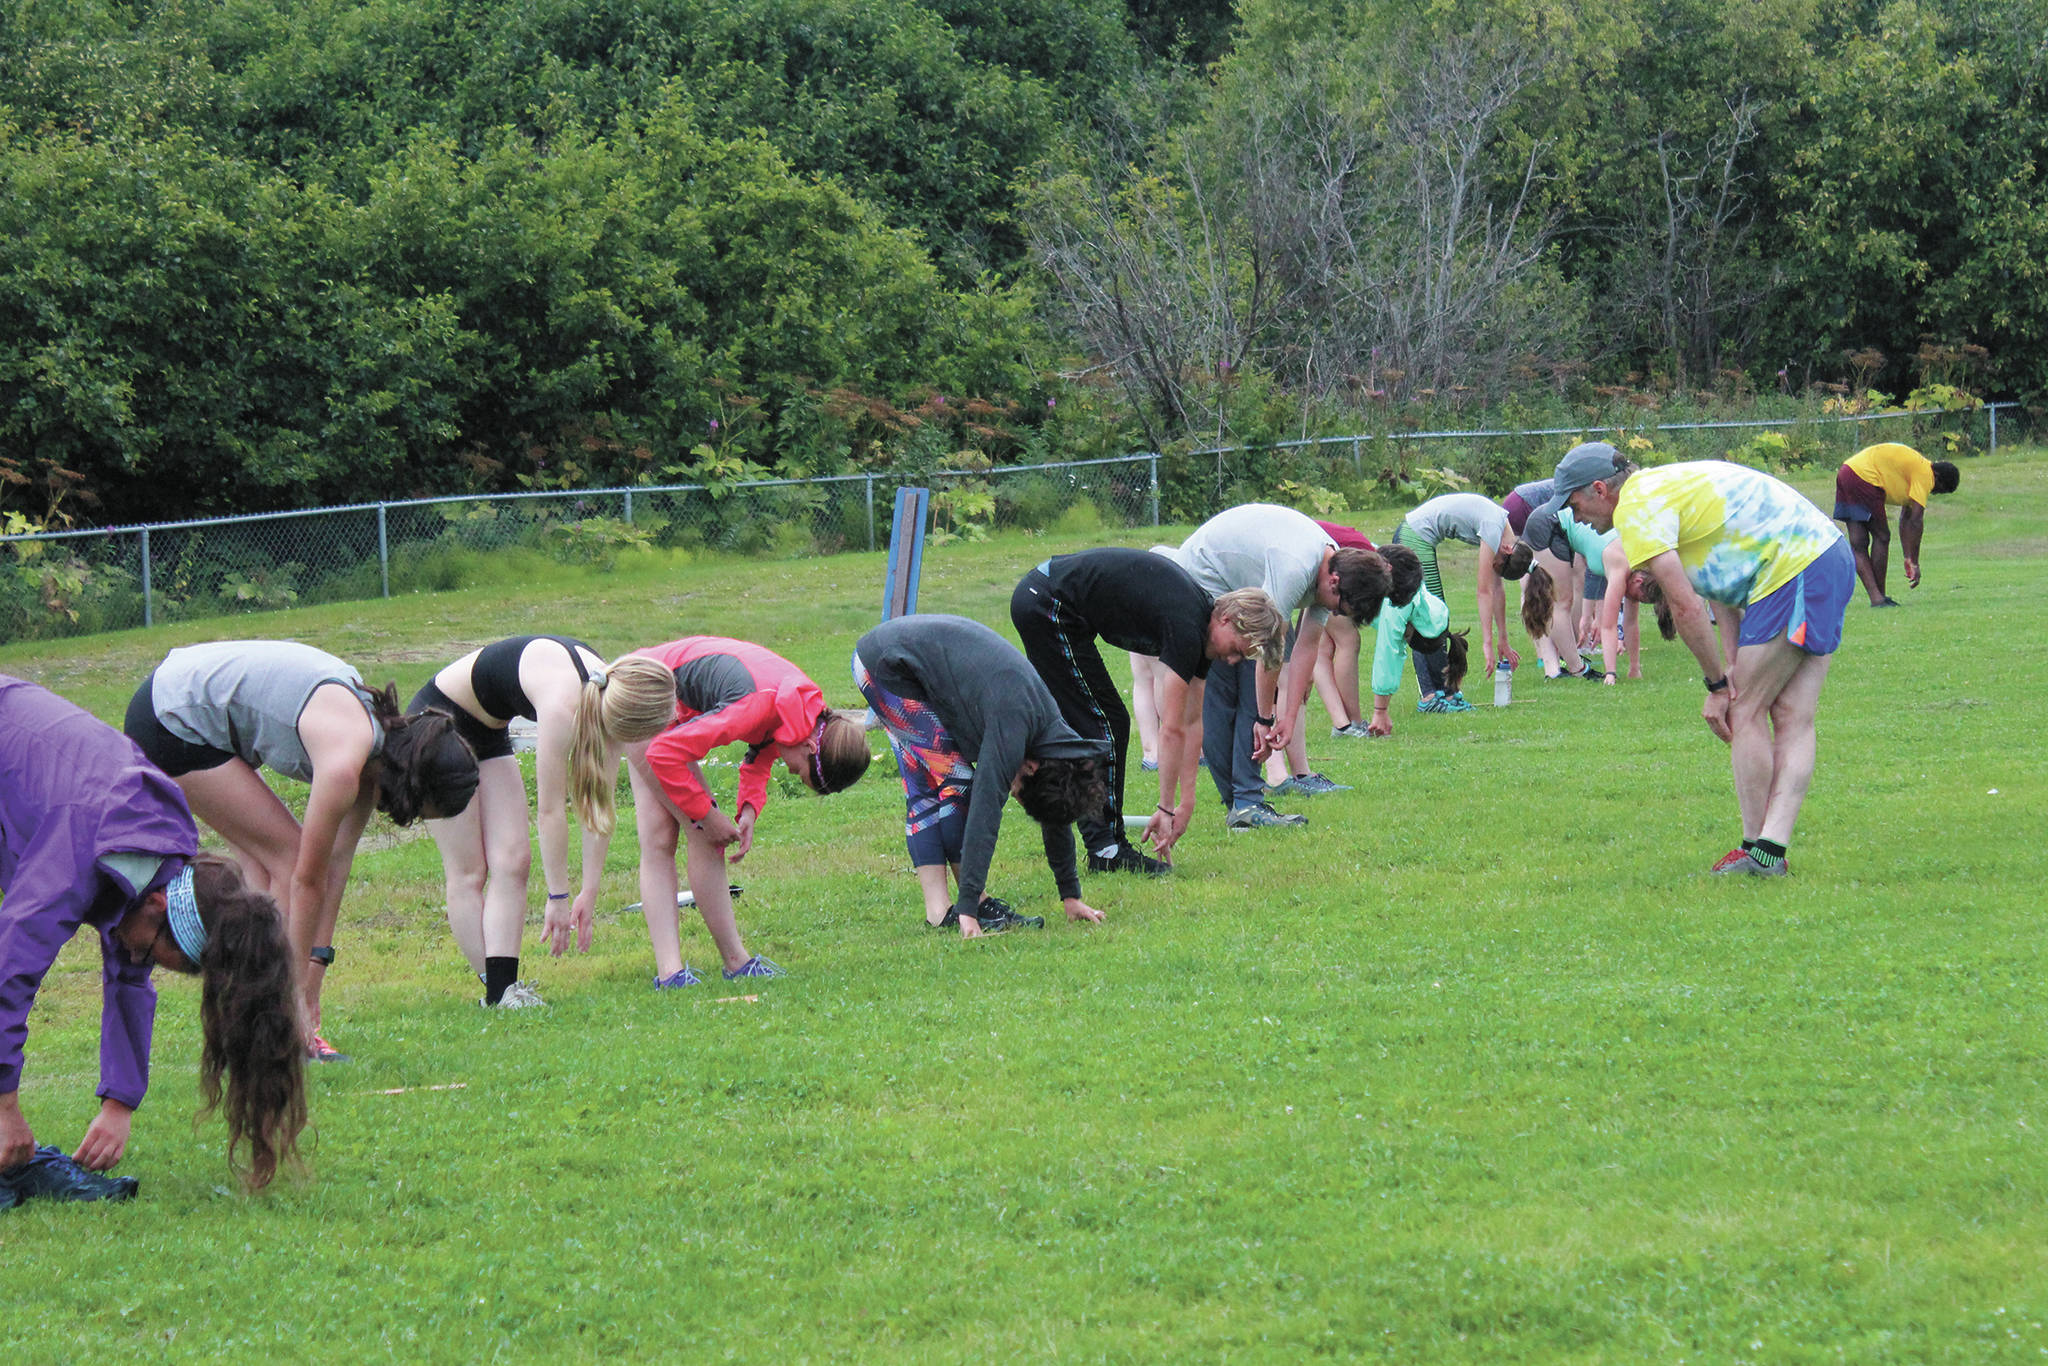 Members of the Homer cross country team stretch with coach Bob Ostrom, right, at the beginning of a Tuesday, Aug. 18, 2020 practice at Homer High School in Homer, Alaska. (Photo by Megan Pacer/Homer News)